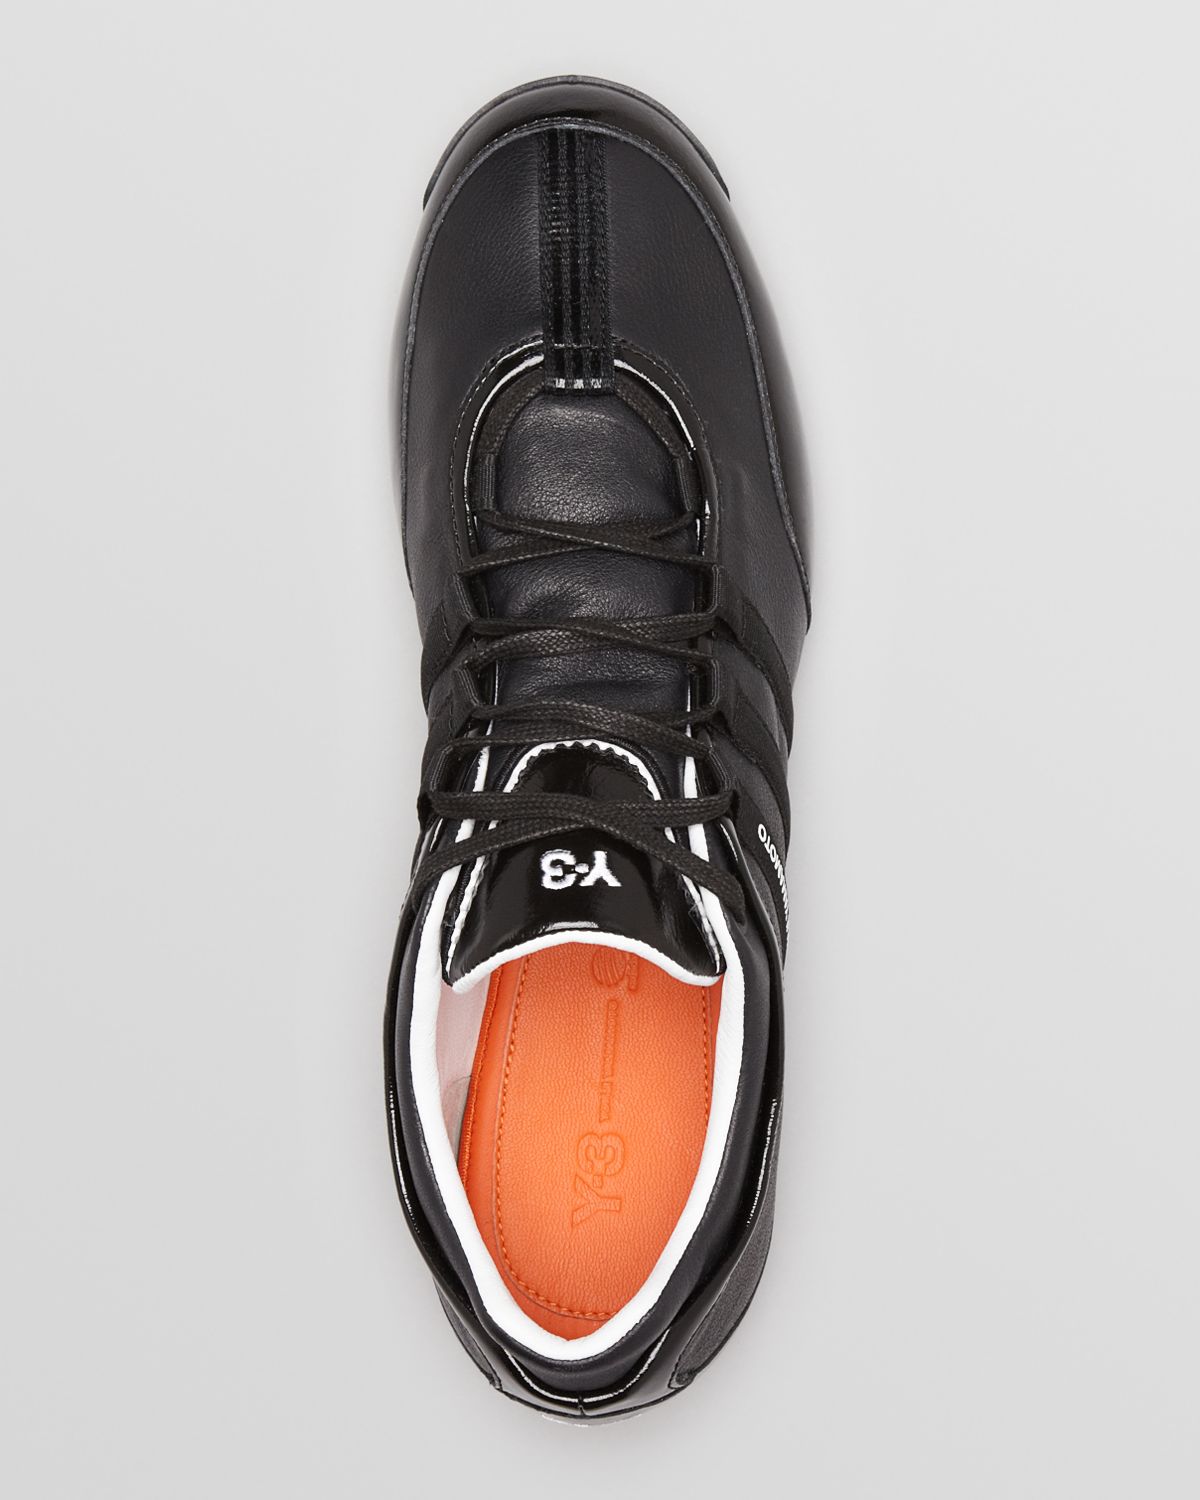 Y-3 Classic Boxing Sneakers in Black for Men - Lyst